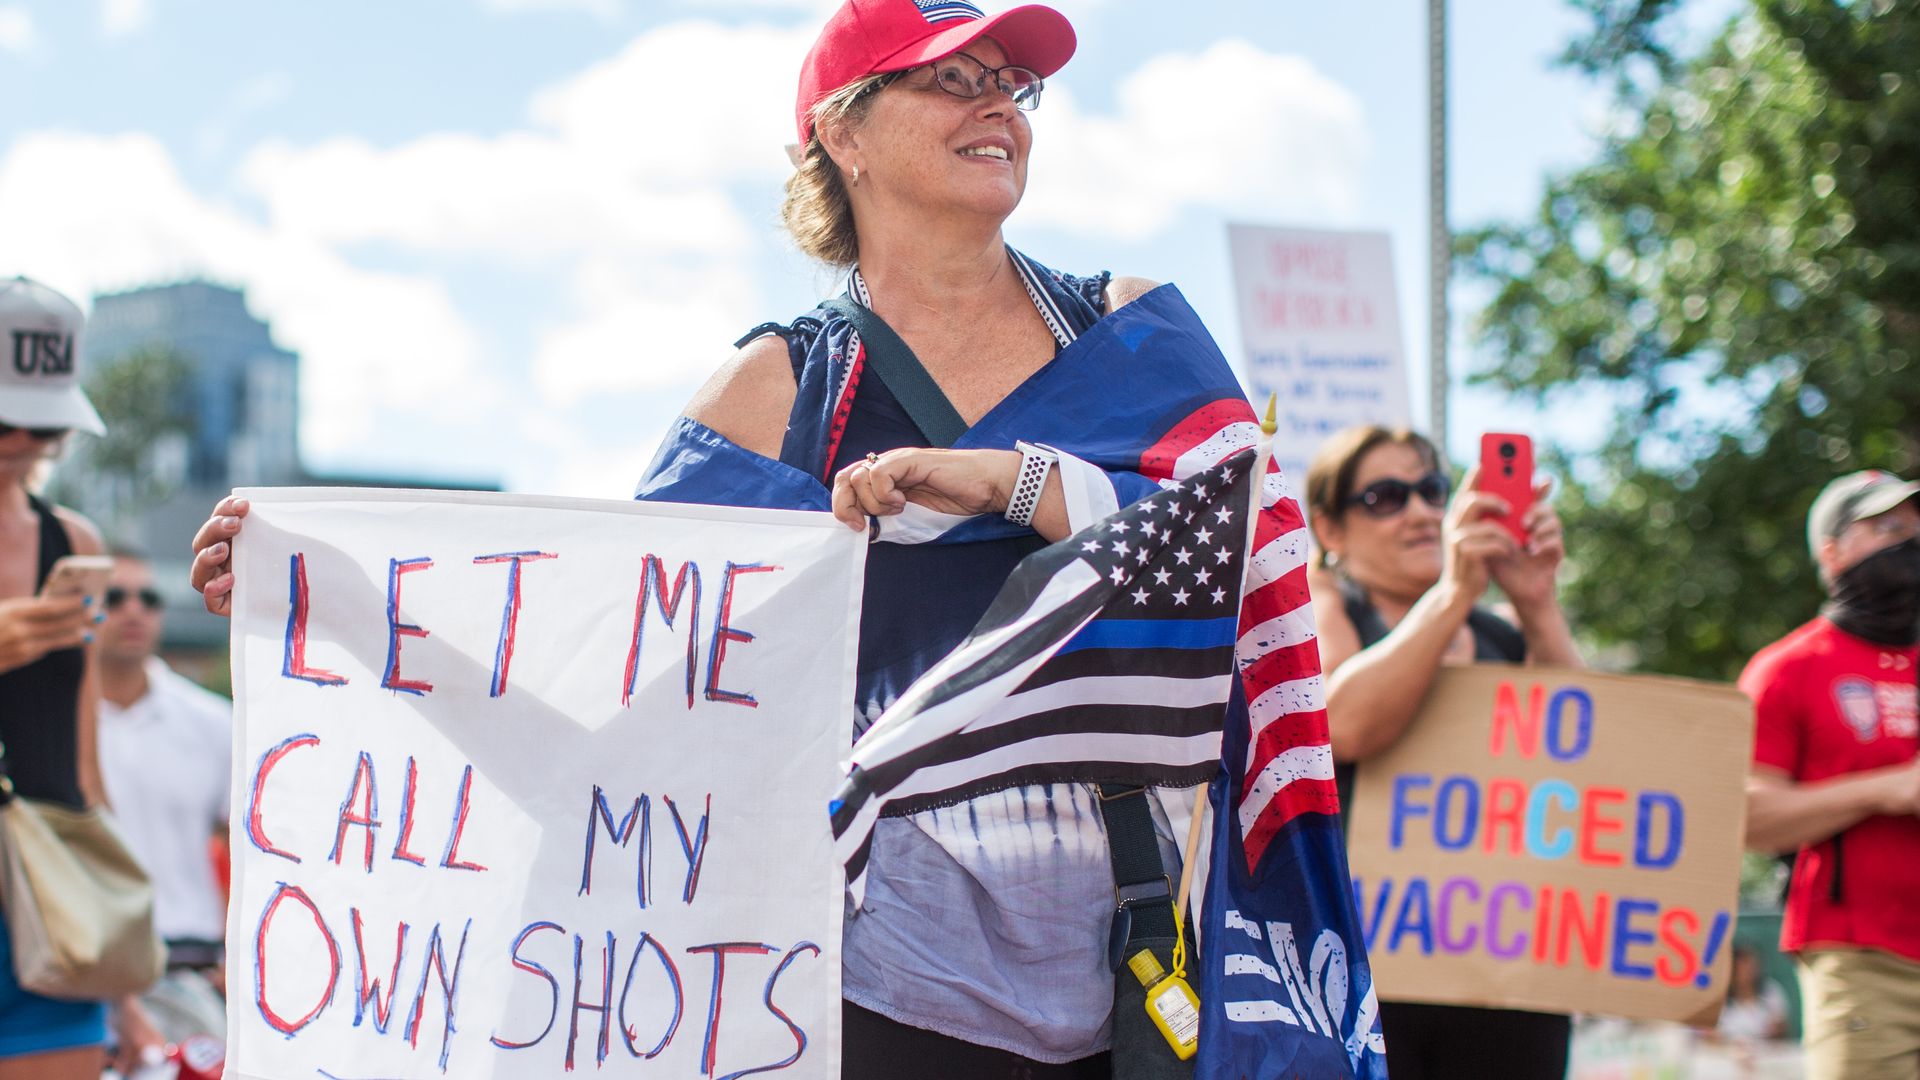 A woman holds a sign that says 'Let me call my own shots.'